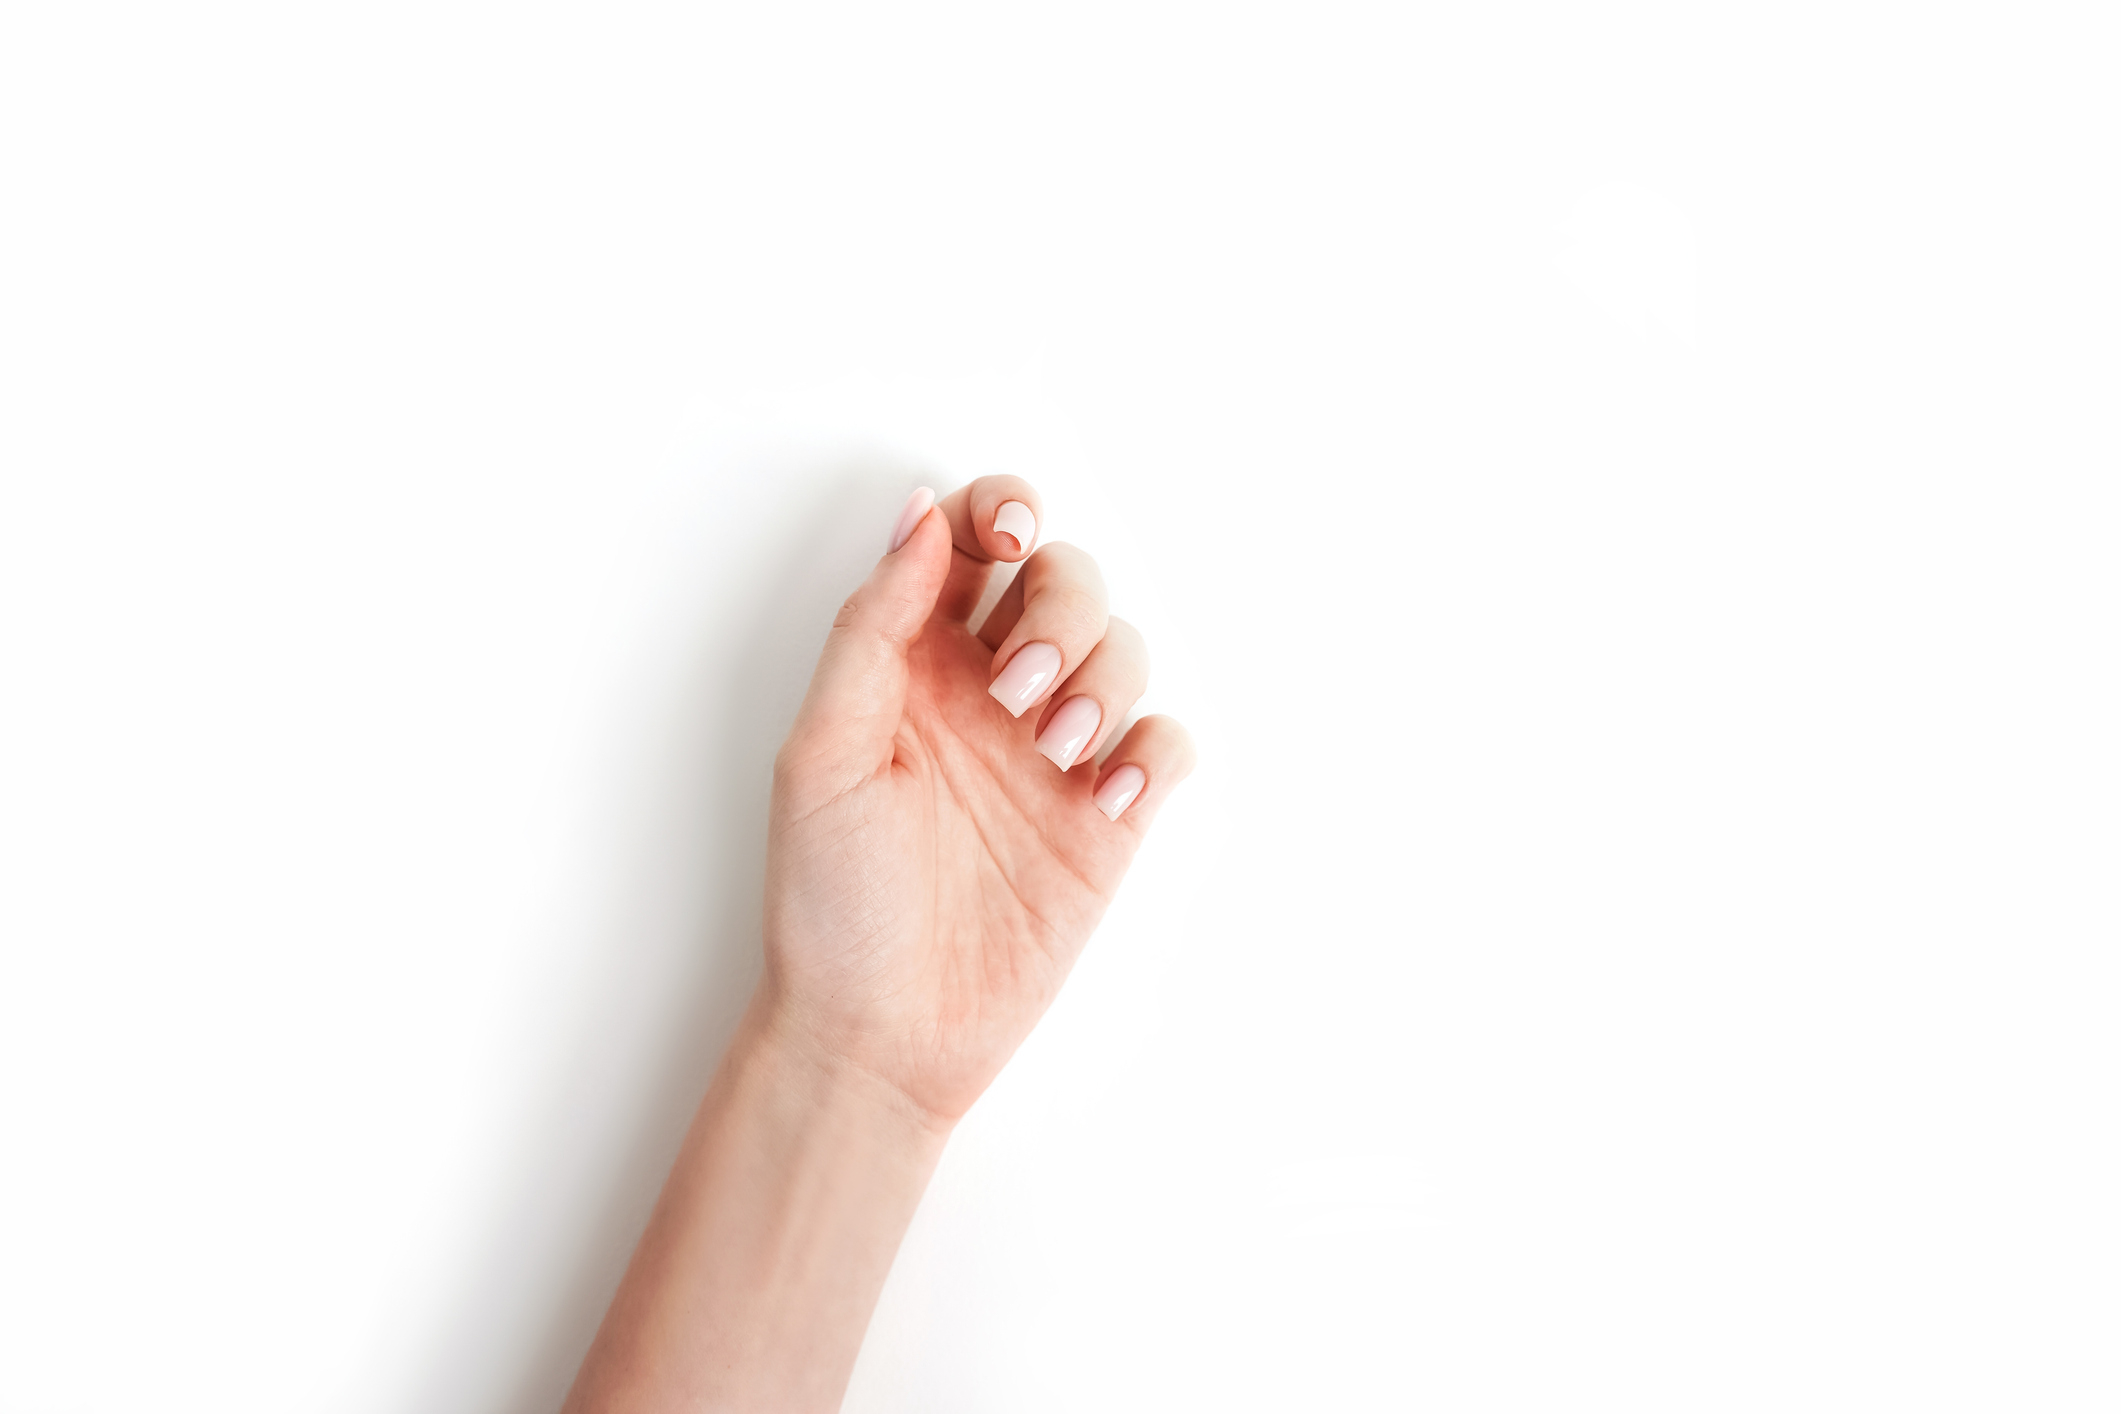 Person&#x27;s hand making a &#x27;pinkie promise&#x27; gesture on a plain background